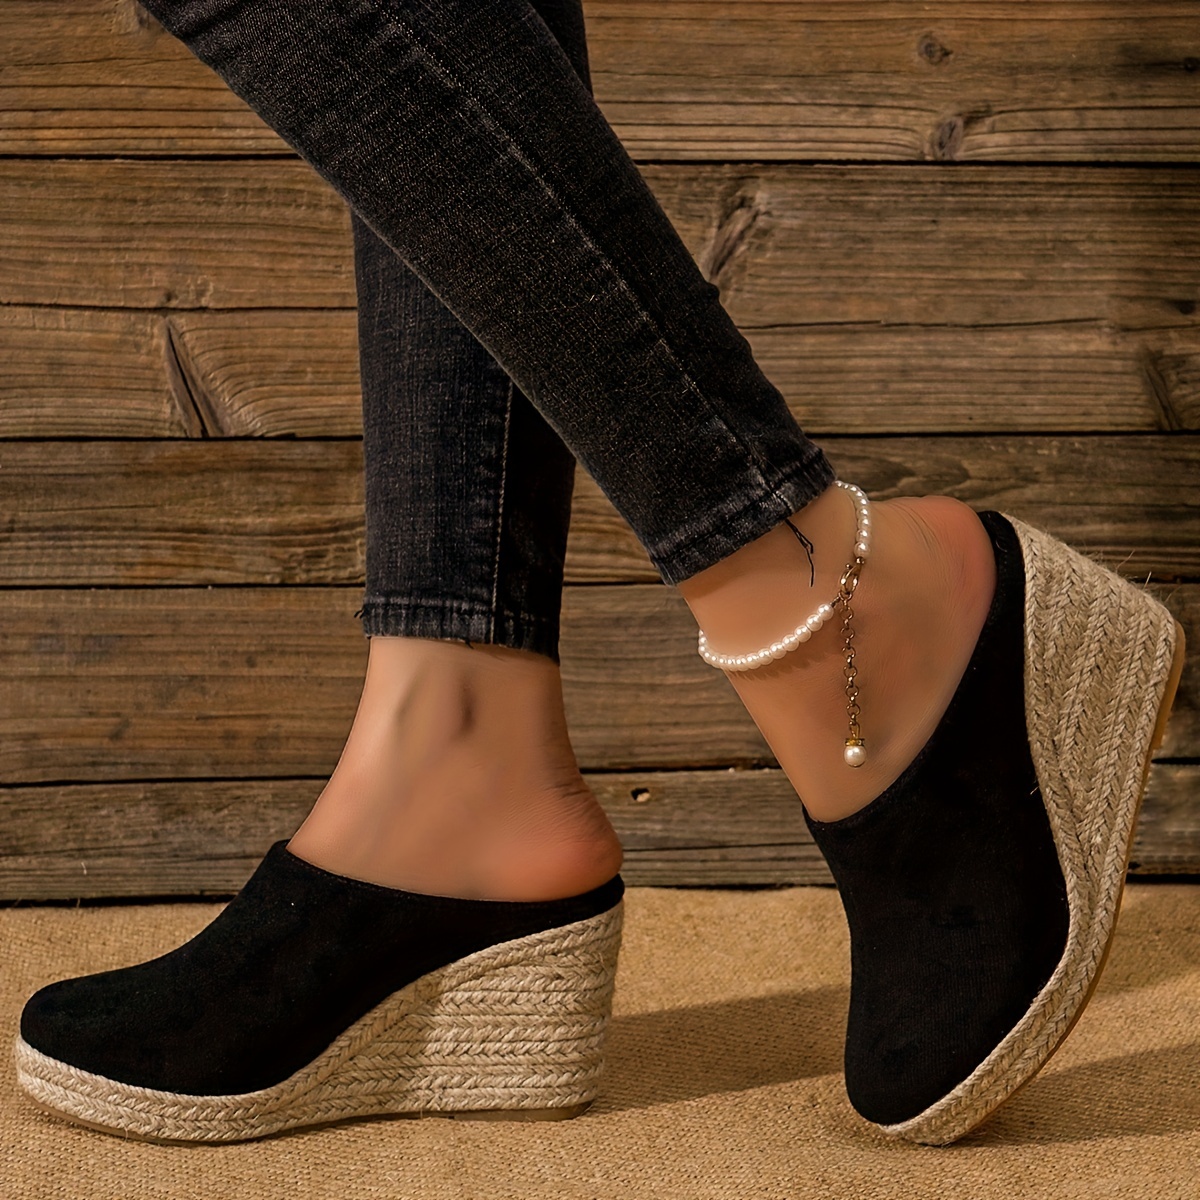 

Women's Espadrille Wedge Sandals, Comfy Closed Toe Backless Slip On Heels, Casual Summer Backless Sandals